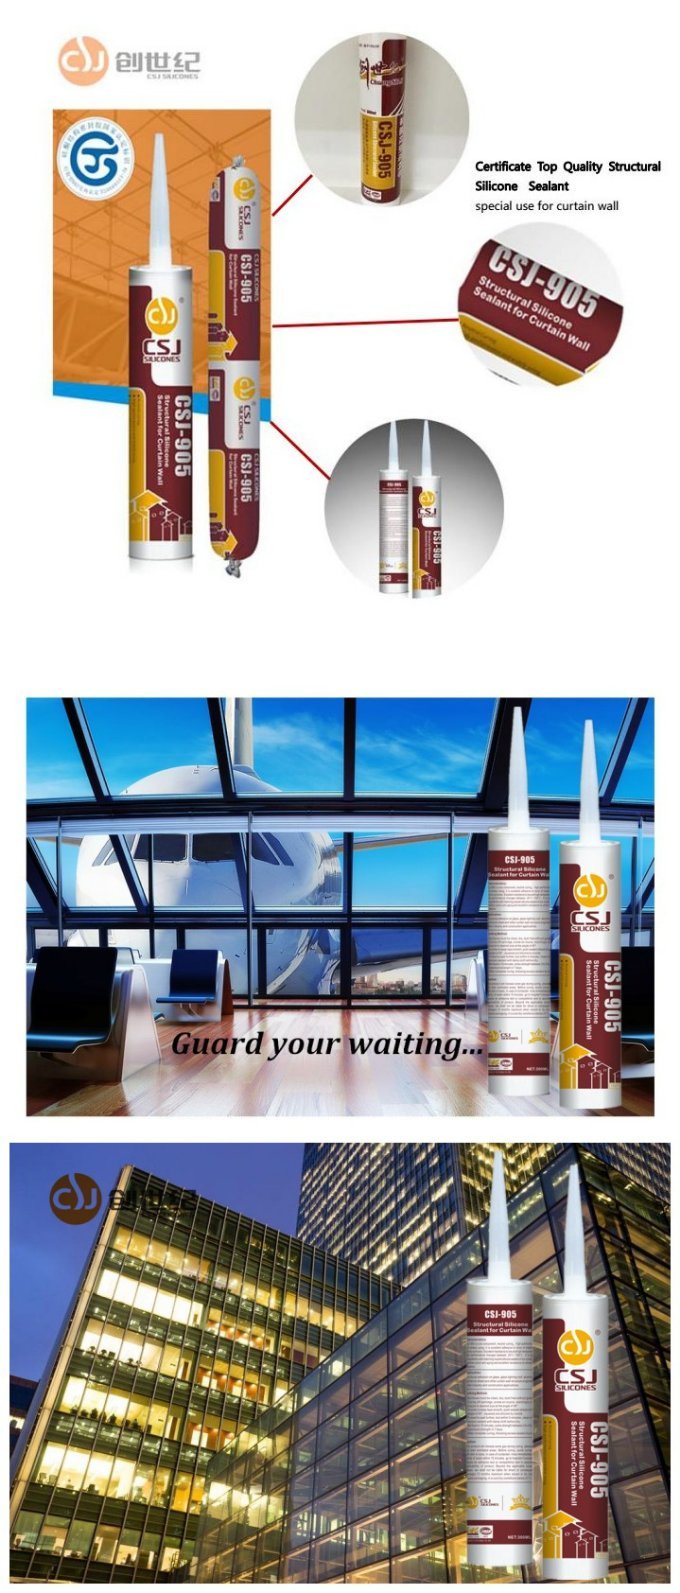 Strong Weatherproof Silicone Sealant for Structural Glass Engineering